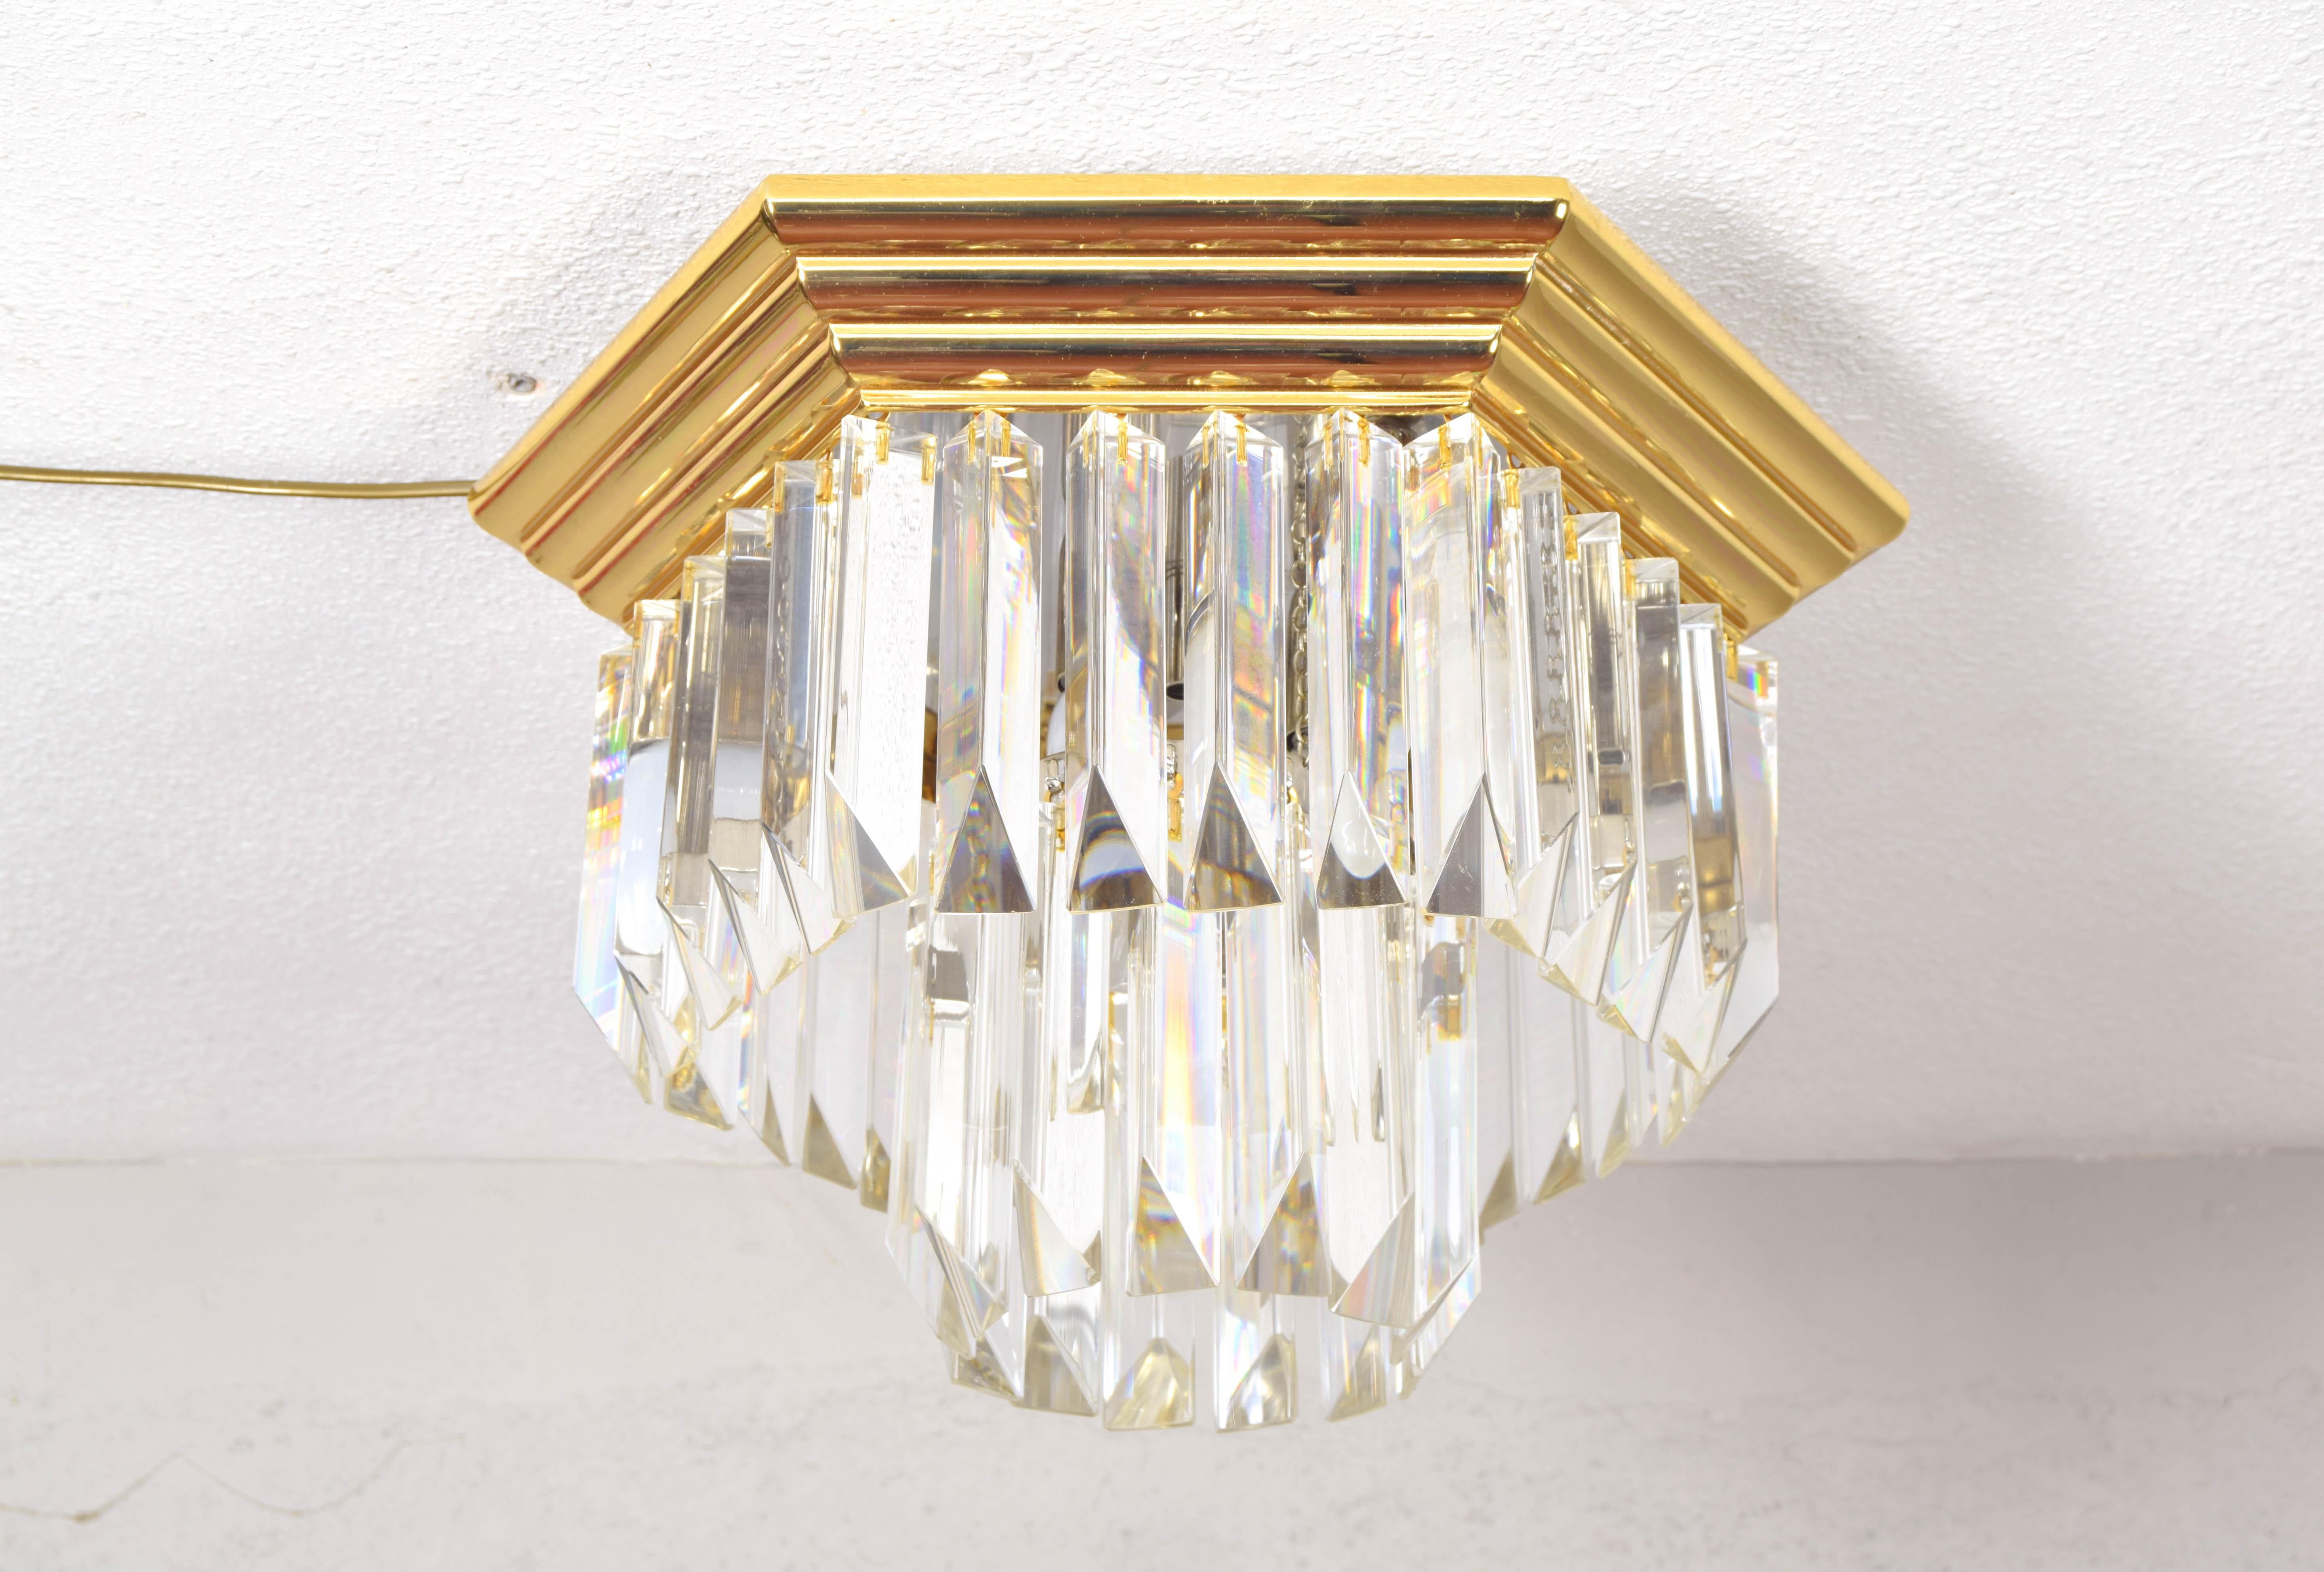 Magnificent Italian flush mount lamp by Venini.
This hexagonal ceiling light consists of a brass and steel structure with two heights and six E14 bulbs.
Composed of 43 beautiful Triedri crystals in very good condition with practically no